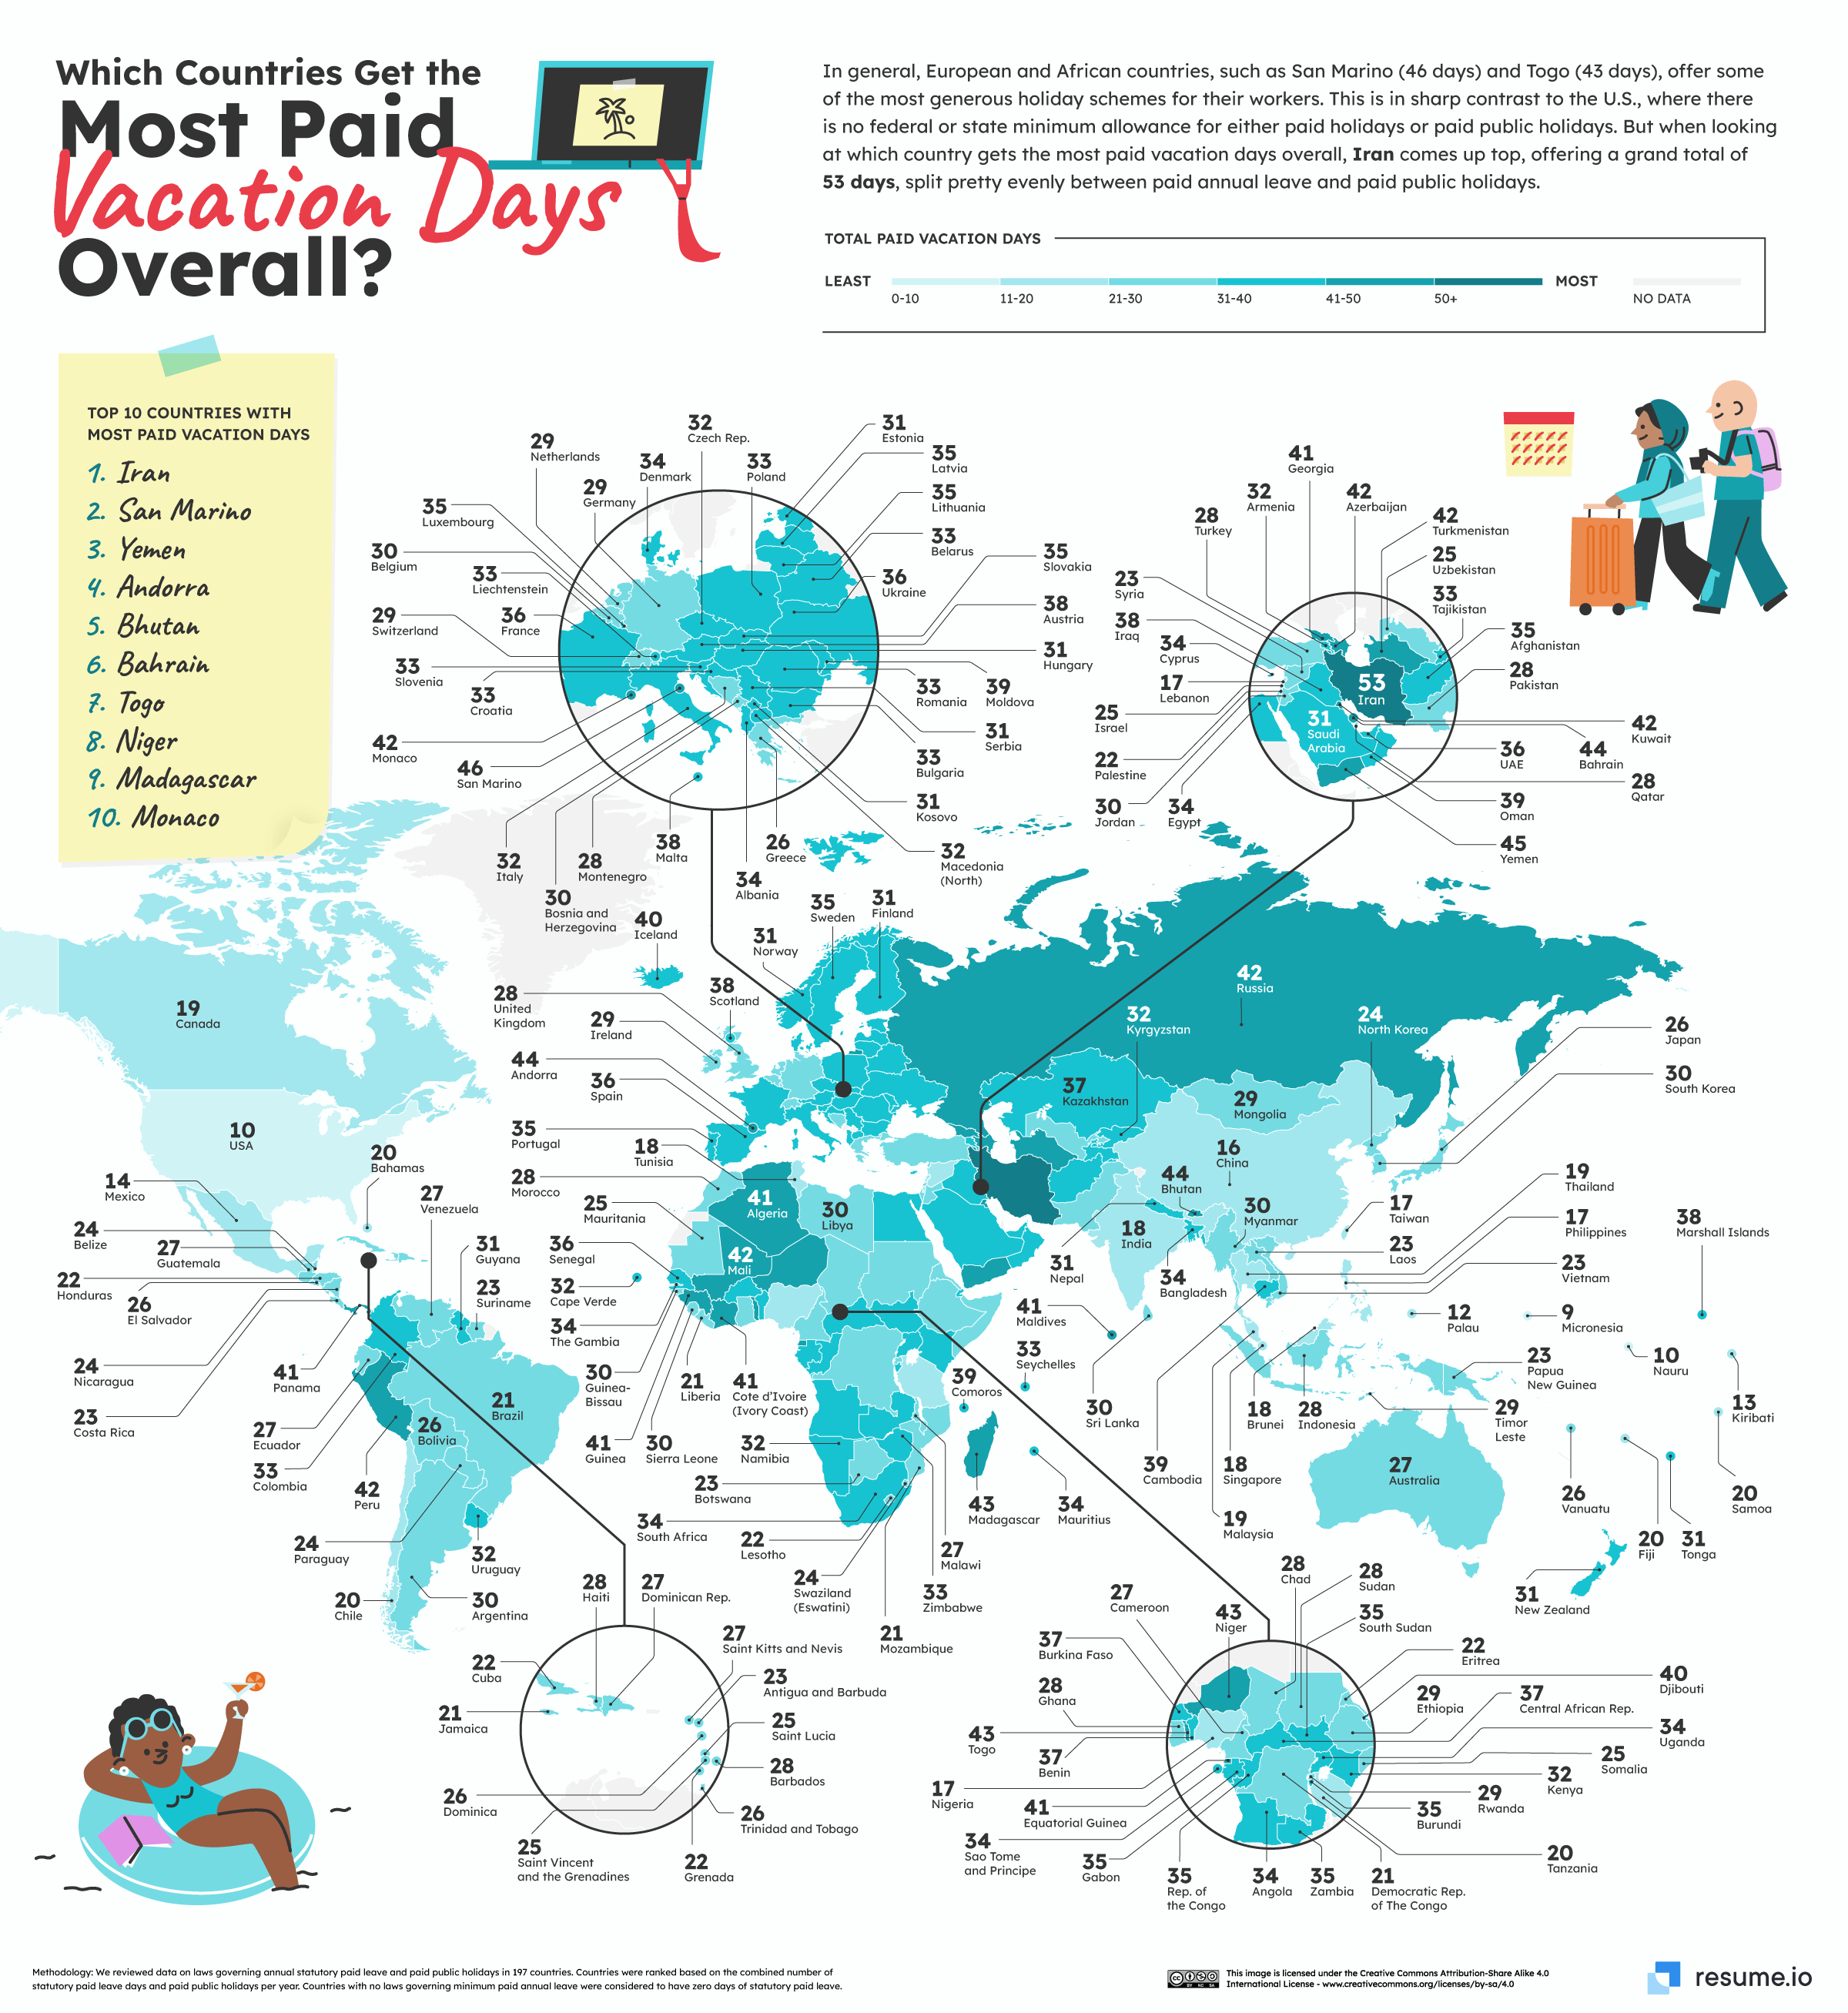 Countries with most paid vacation days